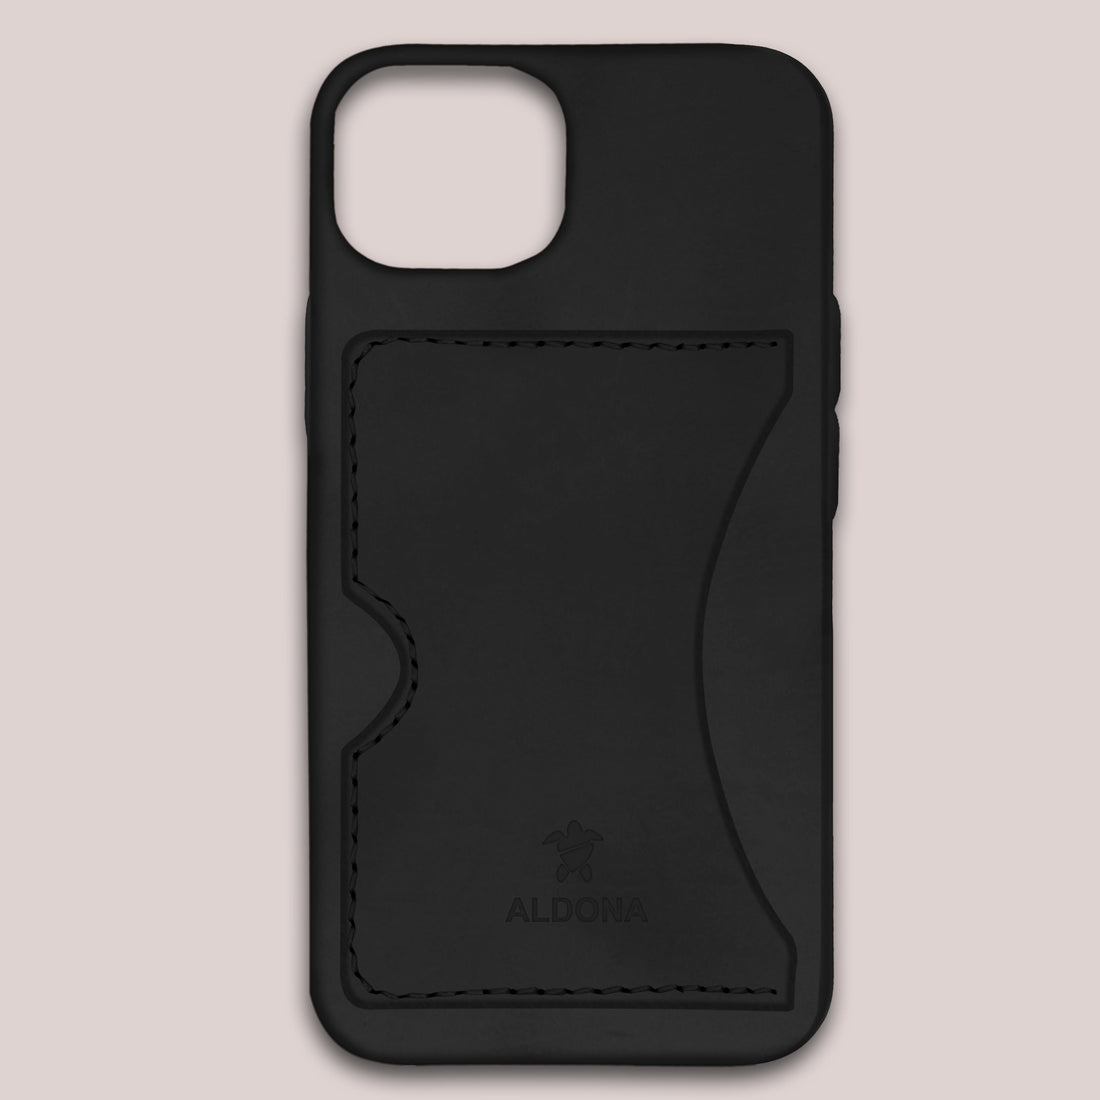 Baxter Card Case for iPhone 12 Pro Max - Burnt Tobacco